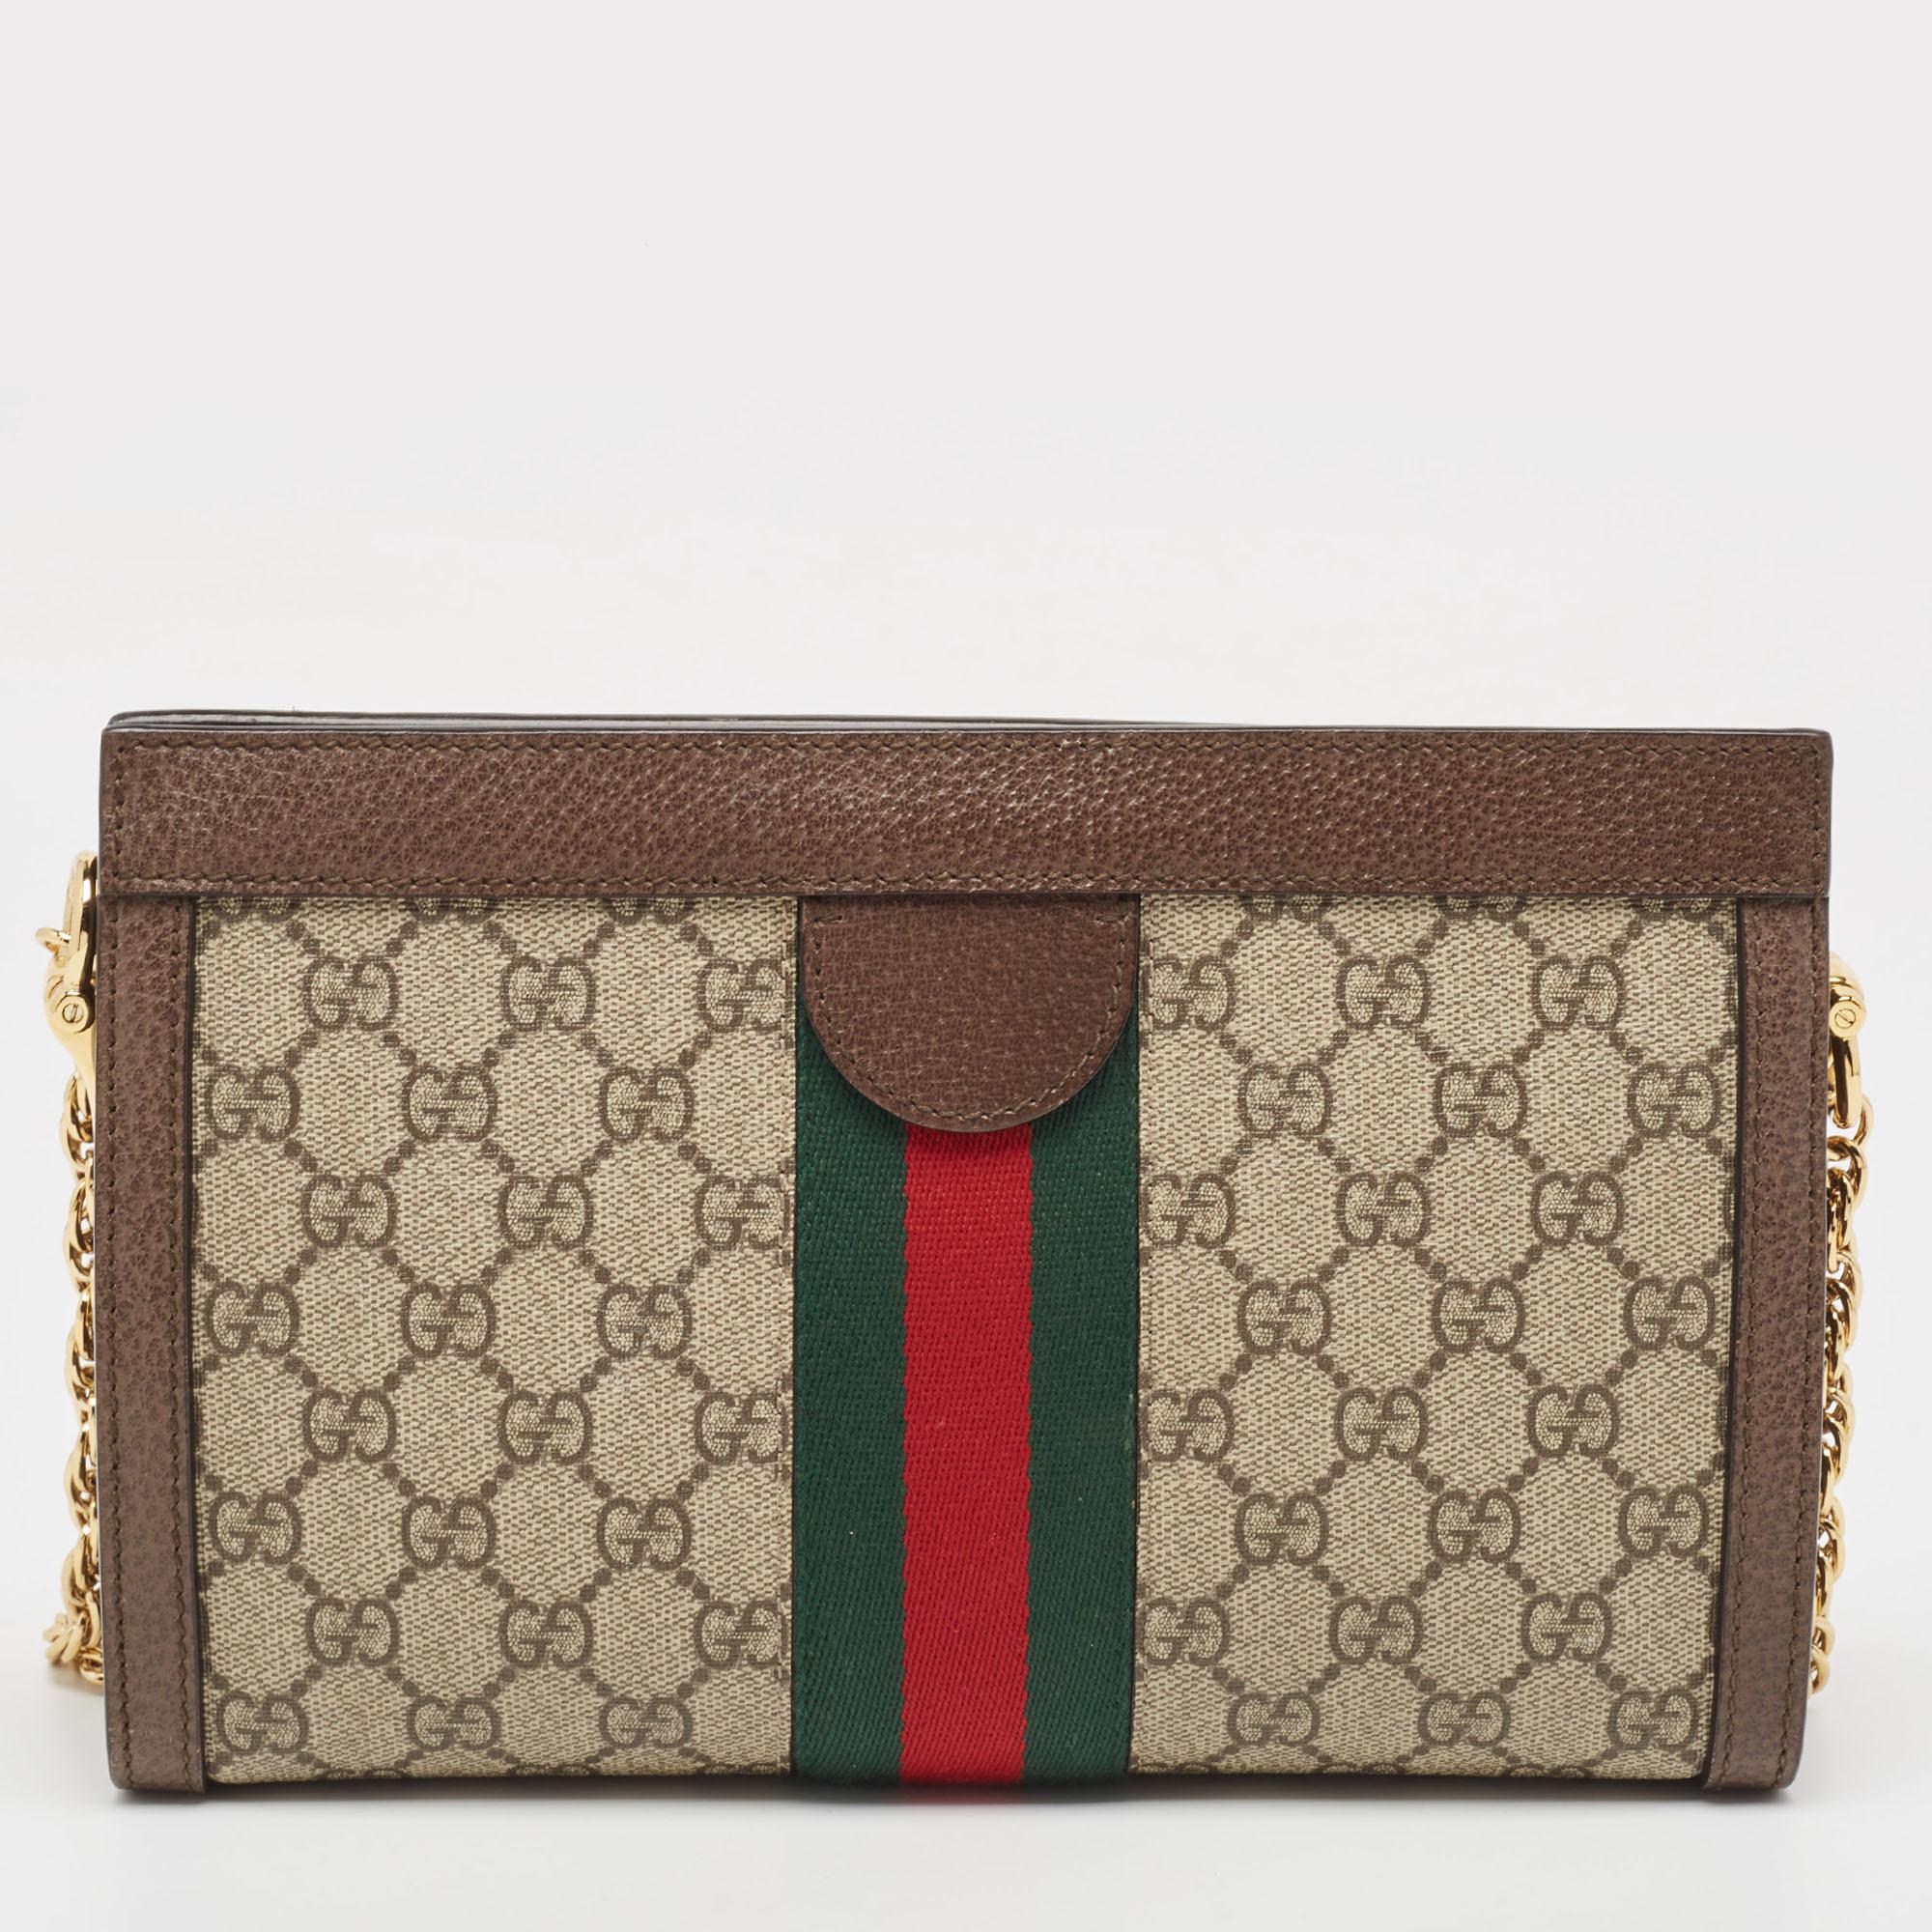 Every creation from Gucci is noteworthy for its timeless charm and versatile design. Created from GG Supreme canvas, this Gucci Ophidia bag is imbued with heritage details. The Web stripe detailing and the interlocked 'GG' motif on the front give it